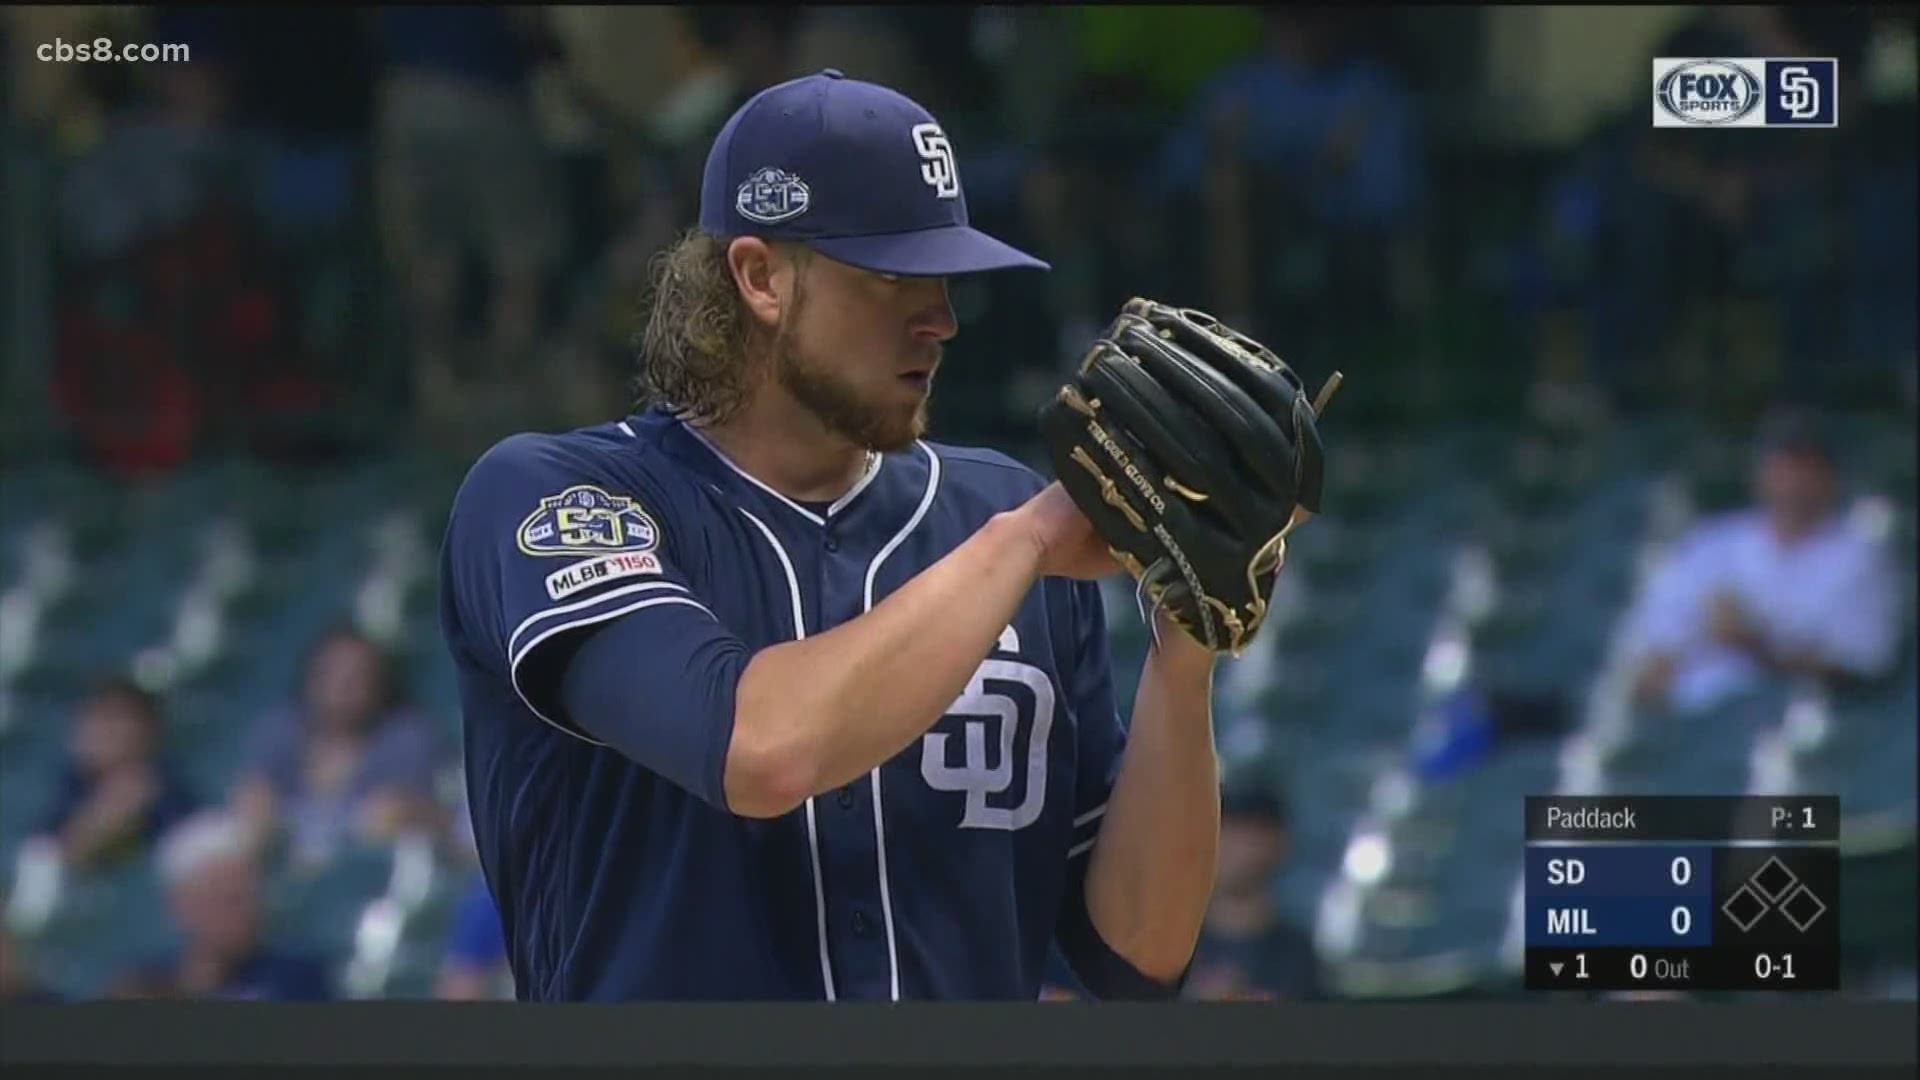 Paddack starting for Padres on Opening Day.